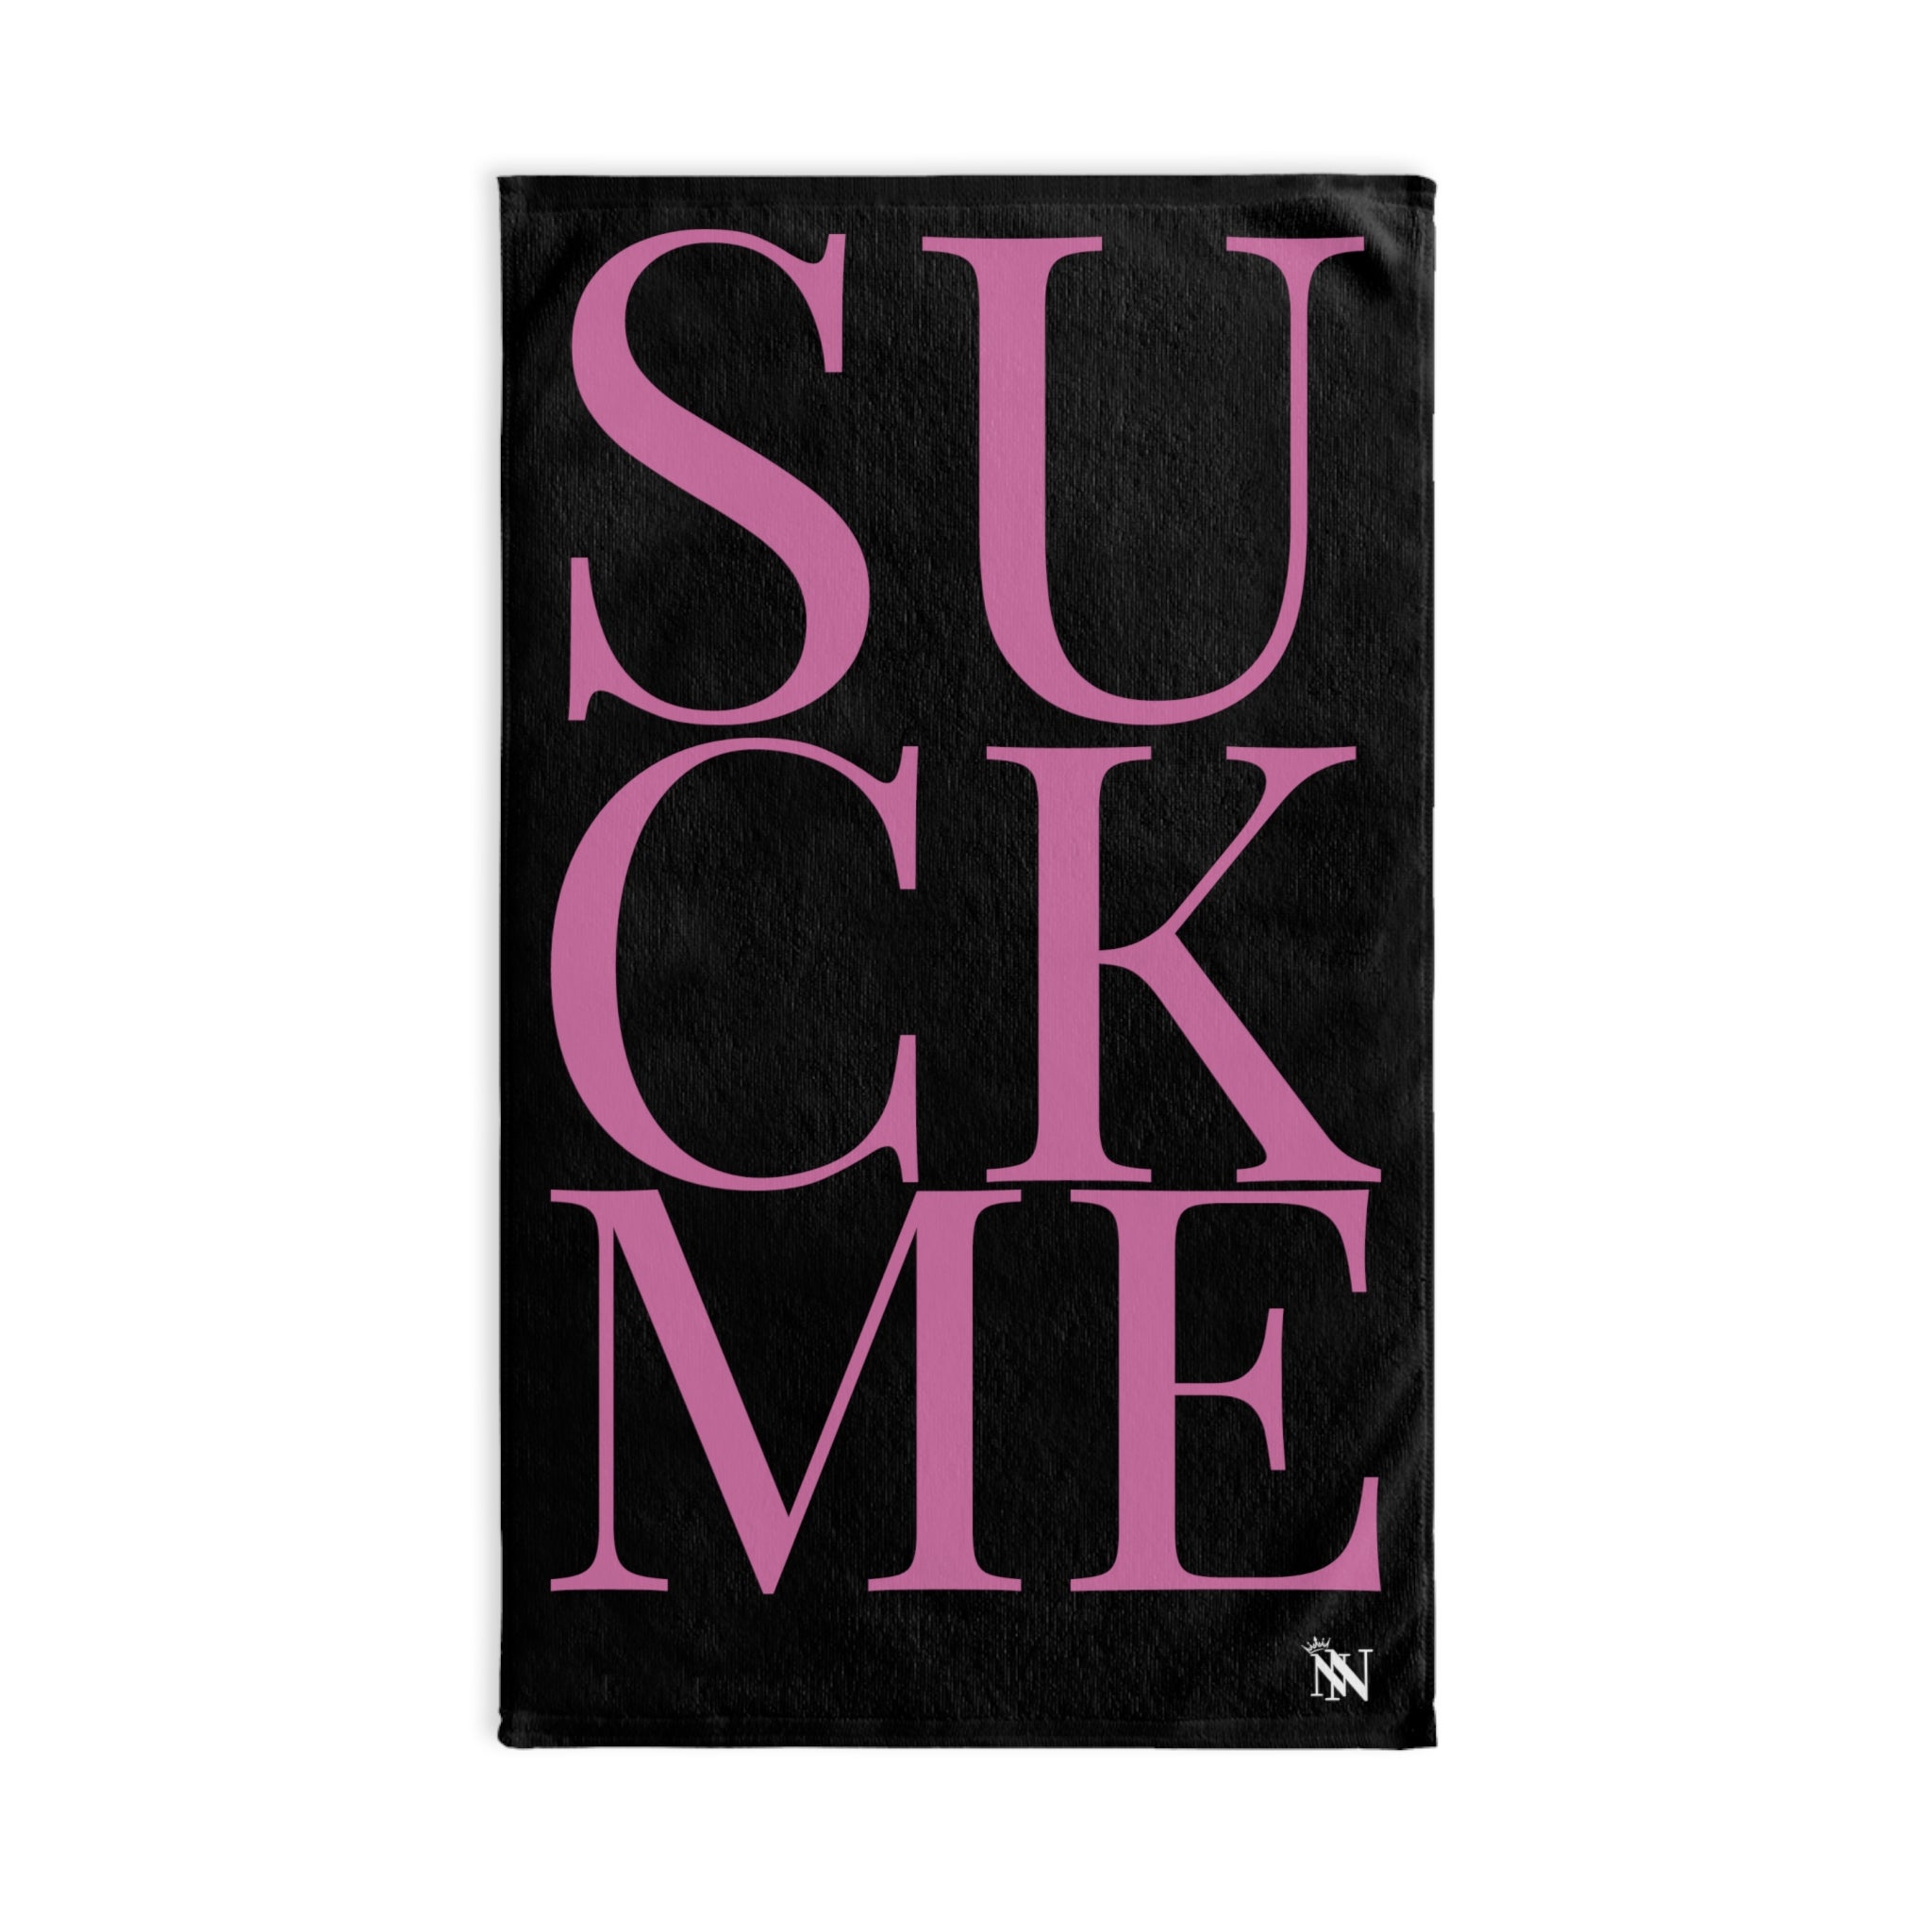 Suck Me Pink Black | Sexy Gifts for Boyfriend, Funny Towel Romantic Gift for Wedding Couple Fiance First Year 2nd Anniversary Valentines, Party Gag Gifts, Joke Humor Cloth for Husband Men BF NECTAR NAPKINS